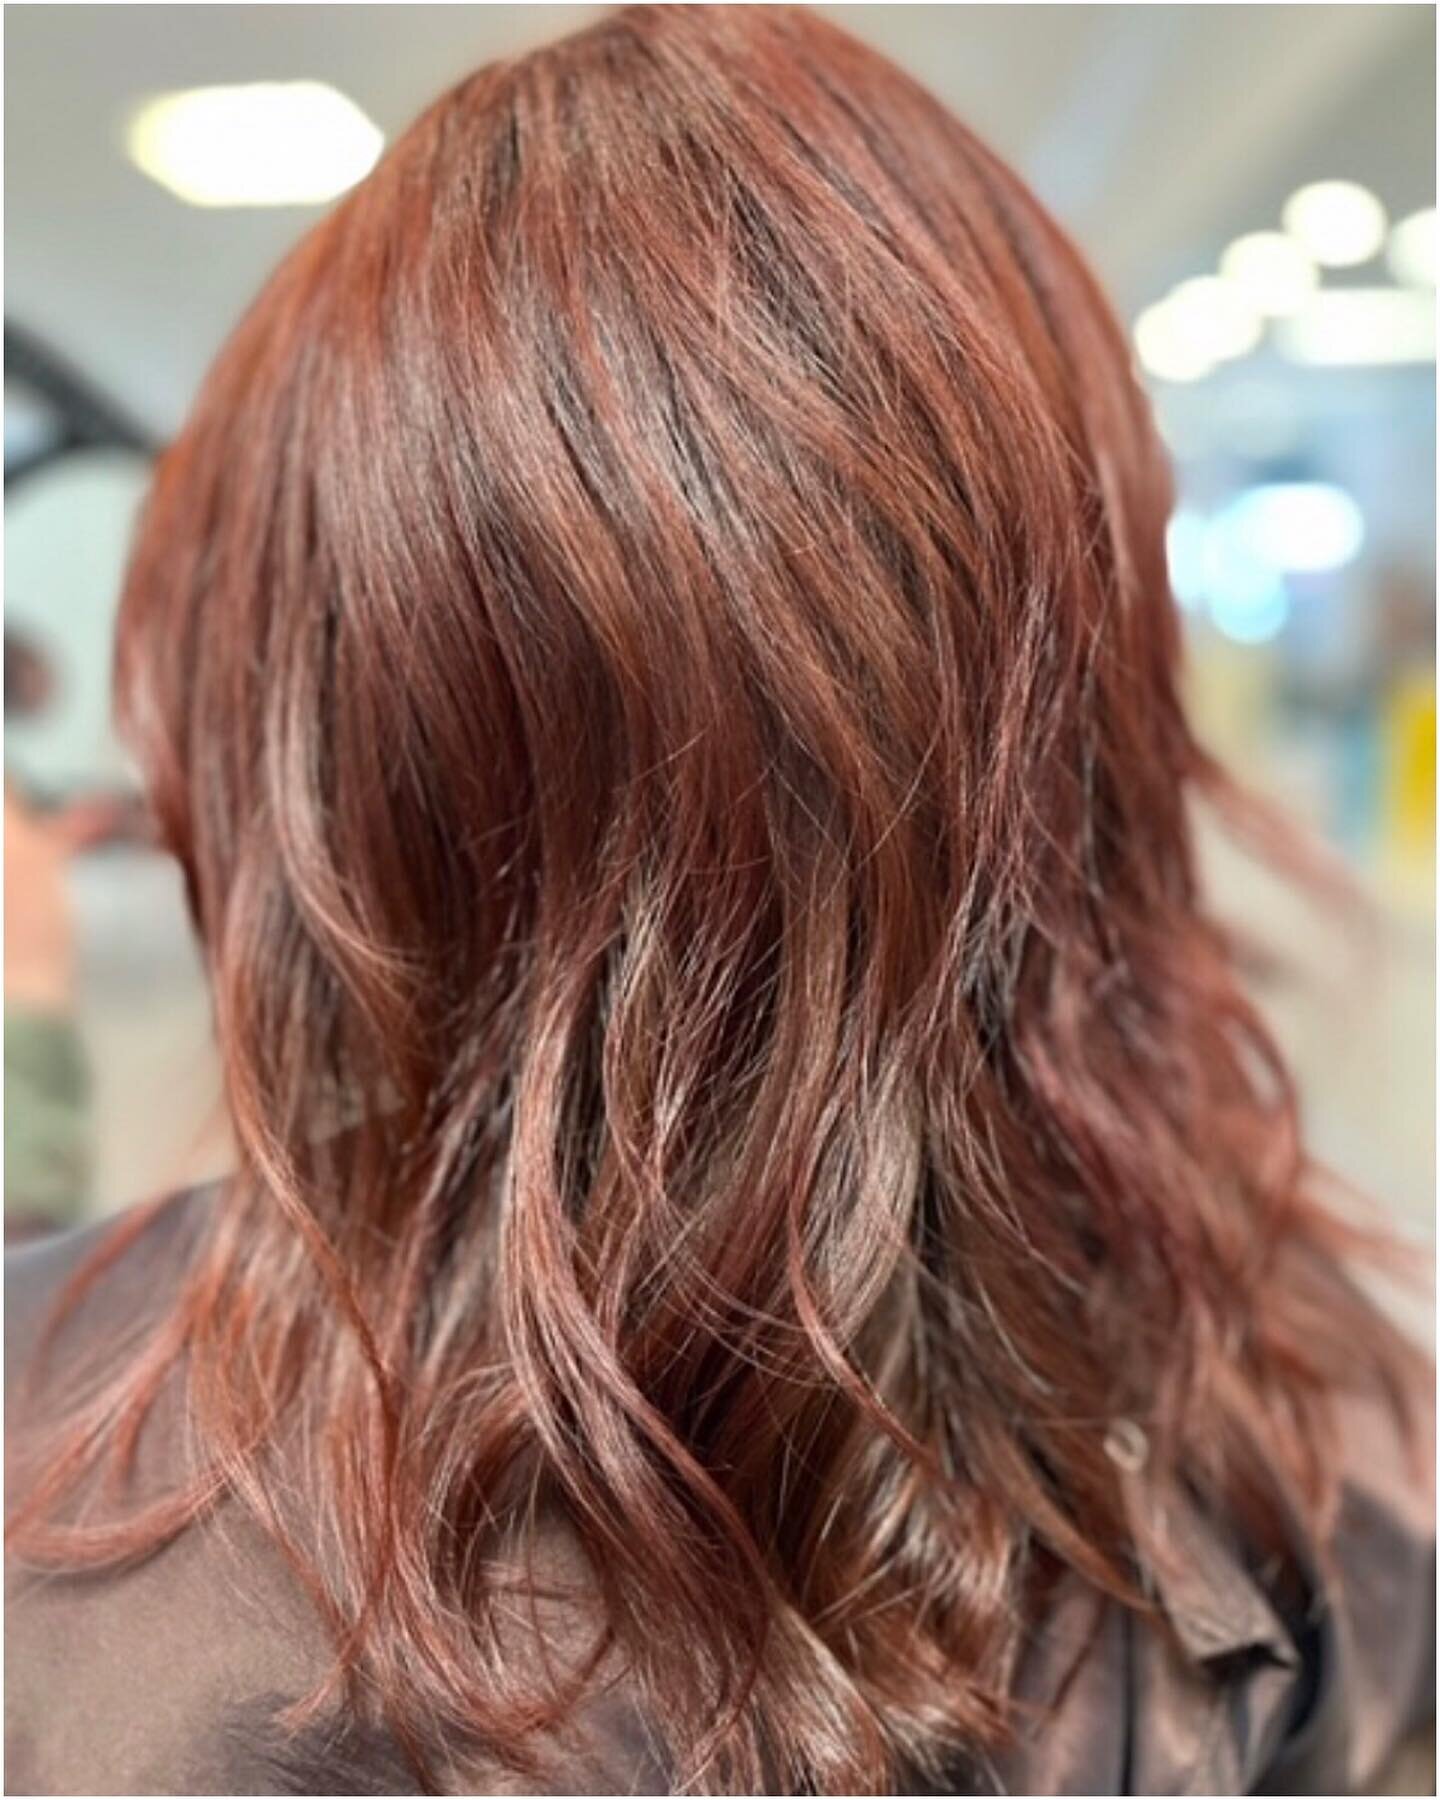 color, cut &amp; style | by Ariannys
&bull;
&bull;
&bull;
#themakeupstudiony #thestudiony #hair #haircolor #hairstylist #haircut #redhair #hairideas #hairbrained #hairsalonfeed #maneinterest #behindthechair #wellaprofessionals #wellahair #kerastase #